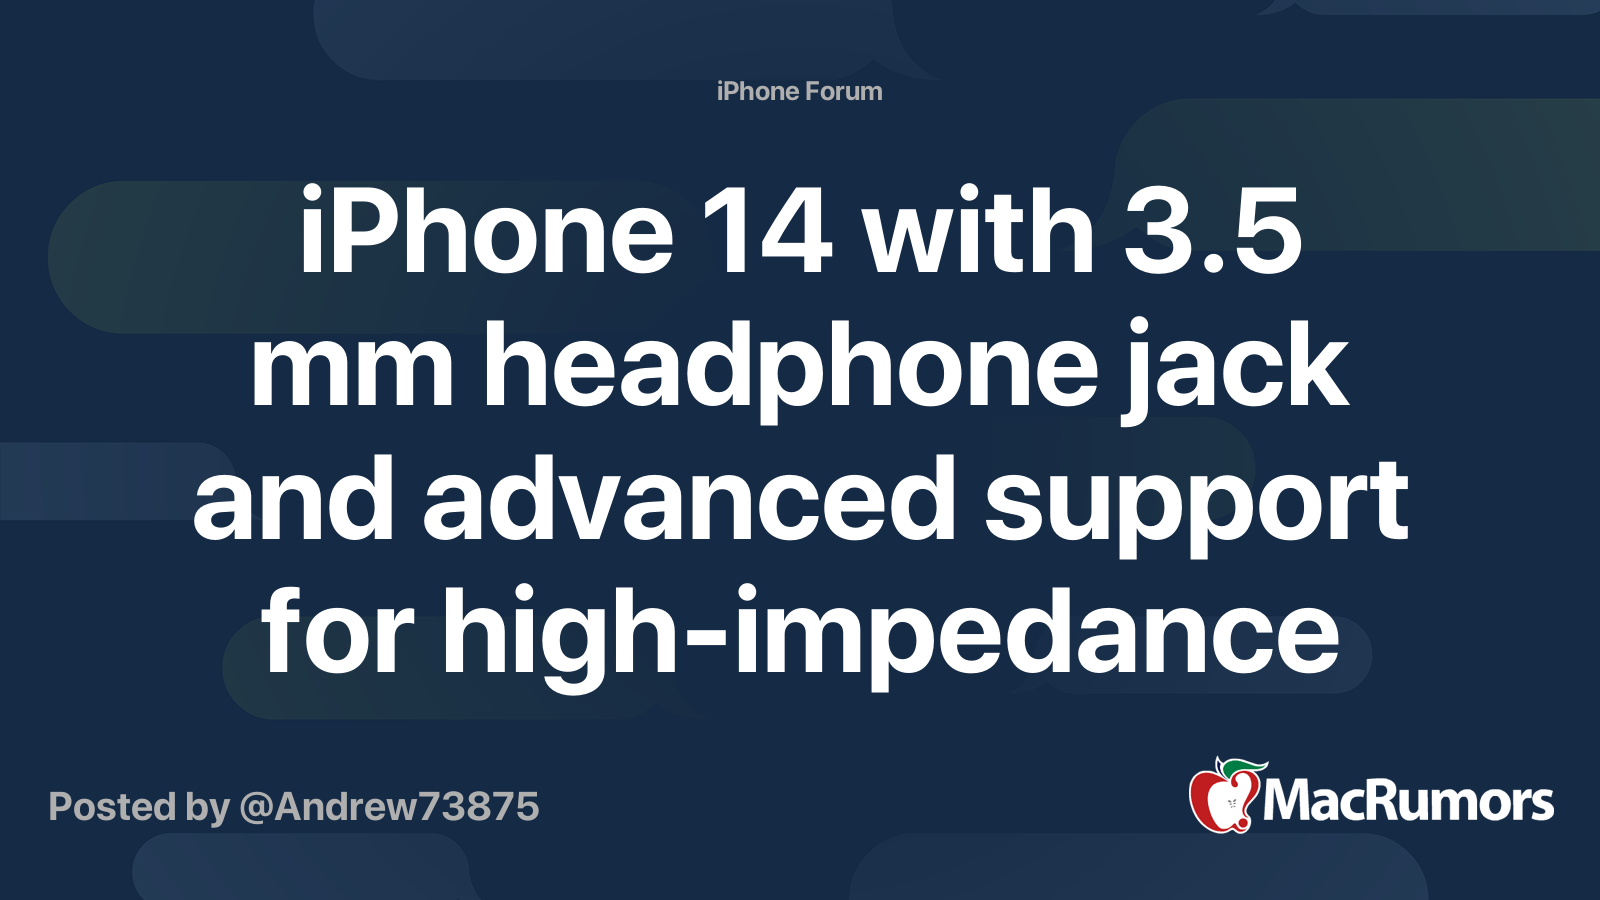 iPhone 14 with 3.5 mm headphone jack and advanced support for high